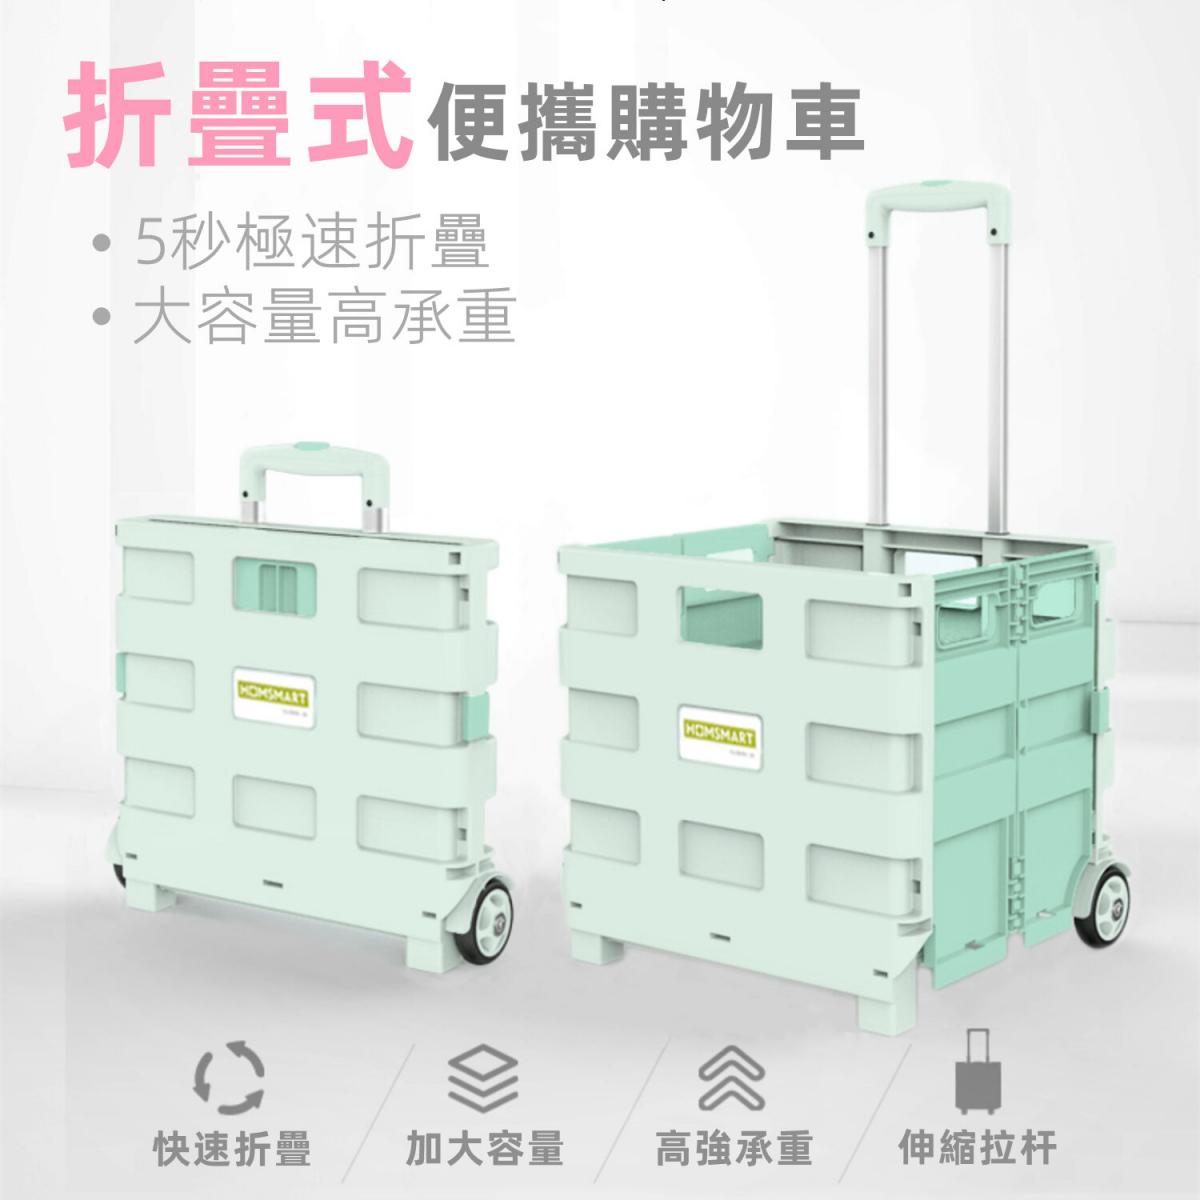 Folding portable shopping trolley 45L/65L two-wheeled camping storage household carts (Mint green)